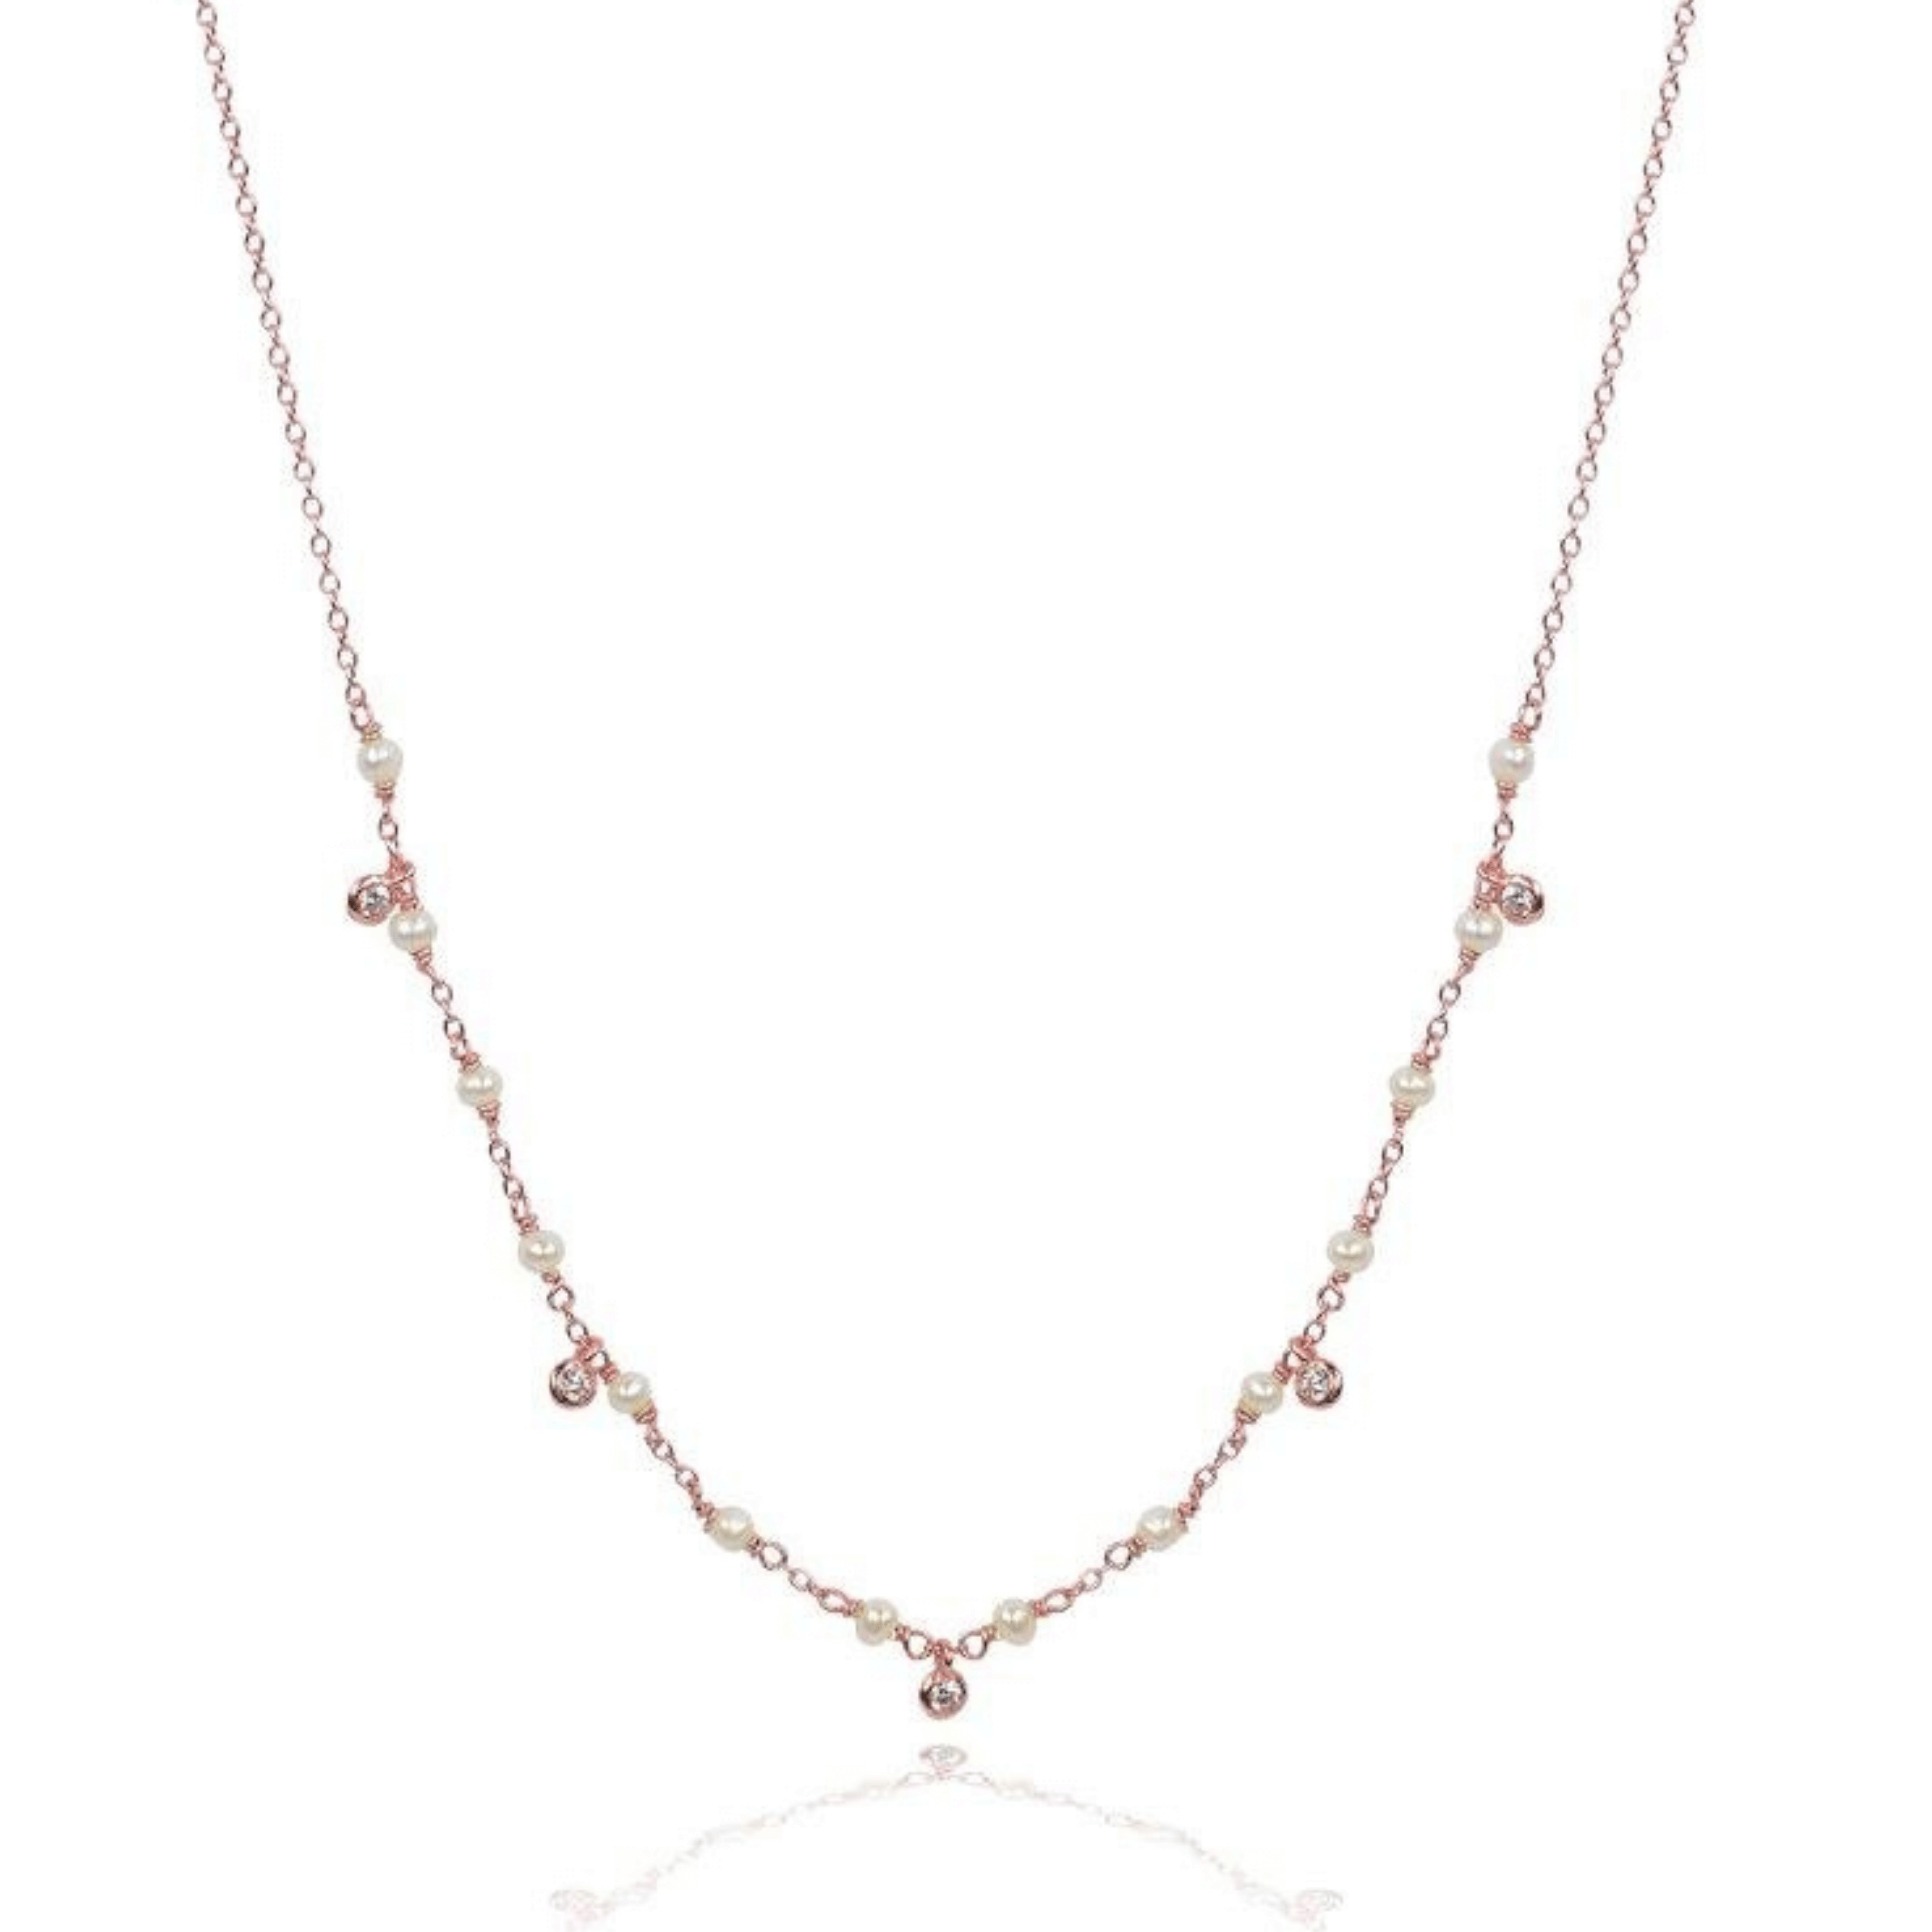 Cubic zirconia and pearl drop rose gold necklace